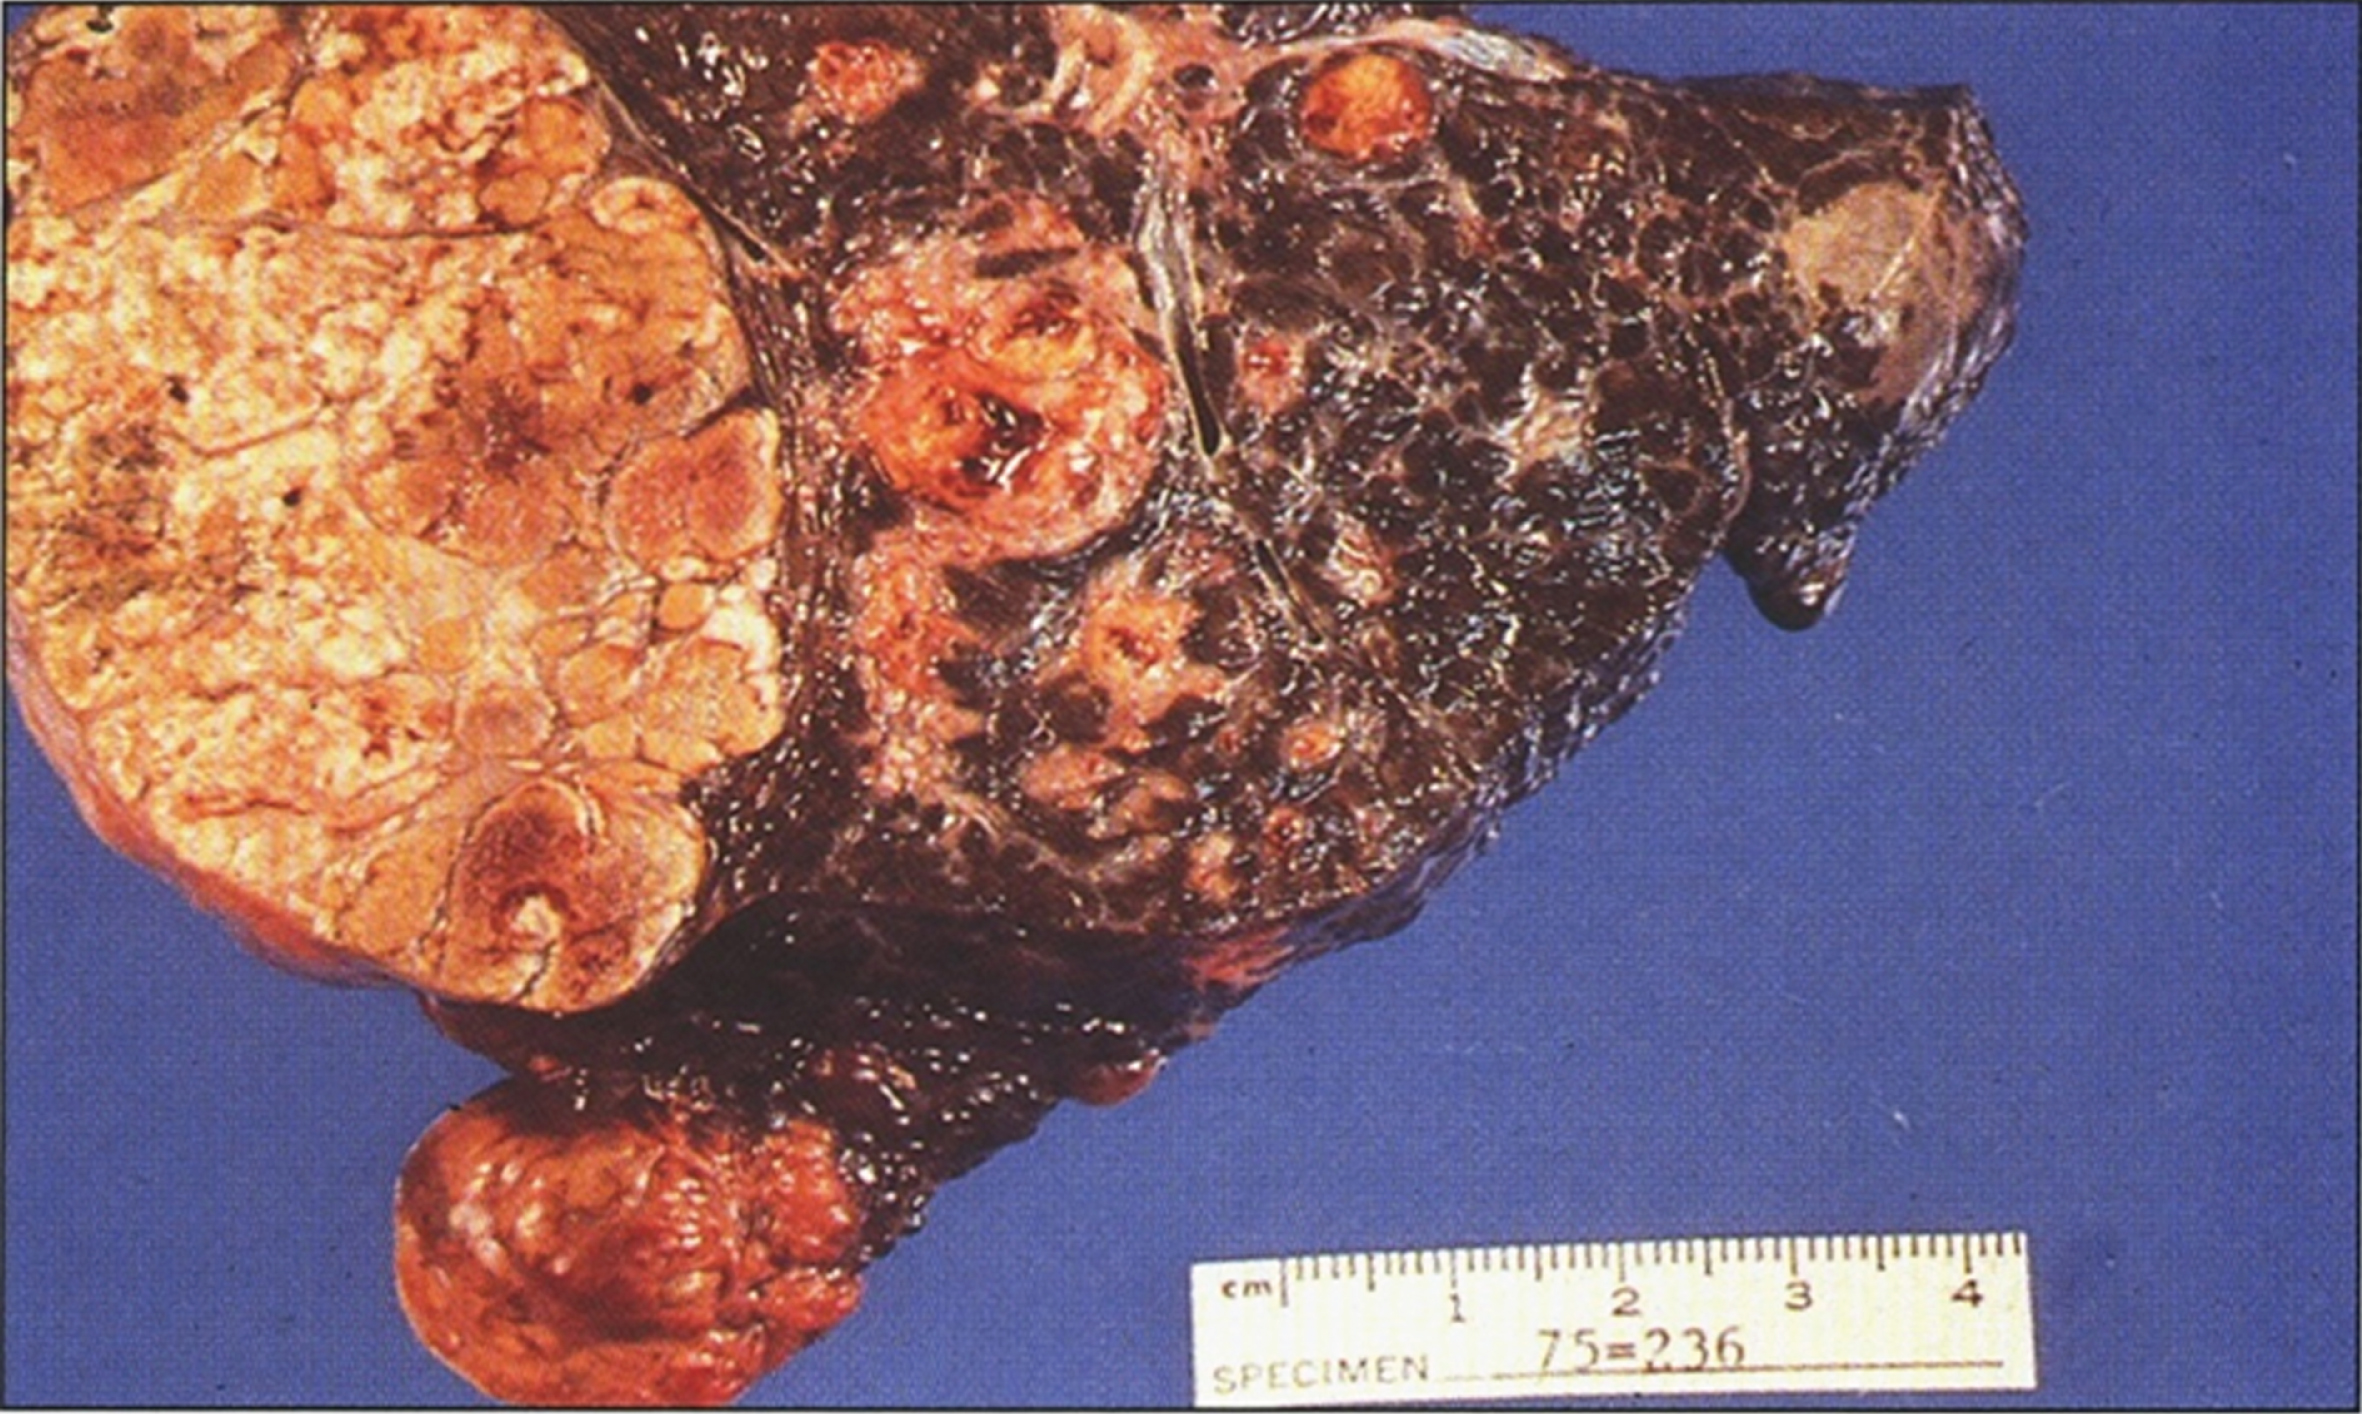 Gross appearance of liver after resection for transplantation showing macronodular and micronodular cirrhosis with large nodule of hepatocellular carcinoma (left) (Figure 7 in the first book).